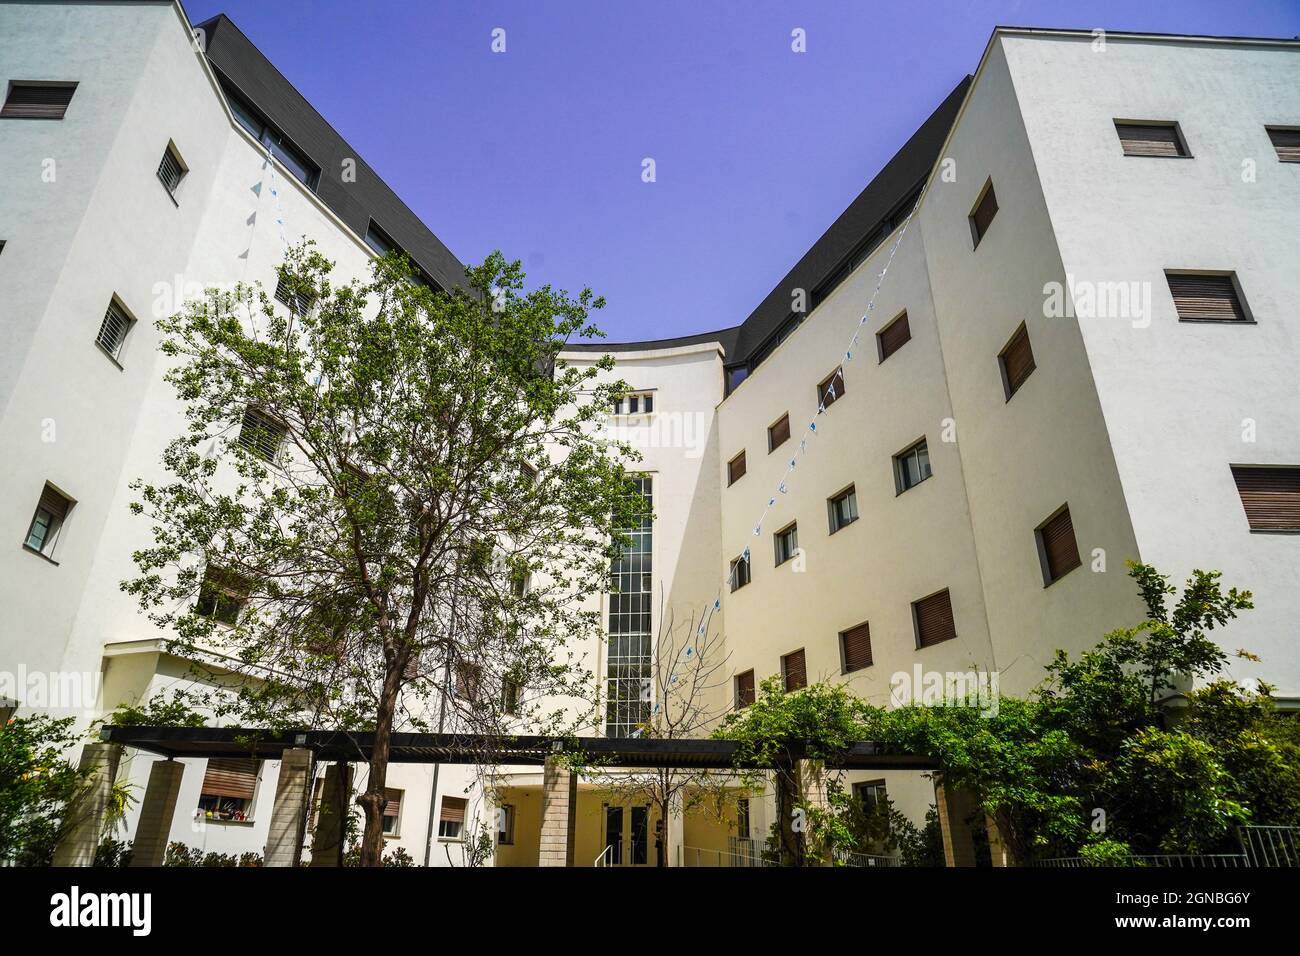 The Zamenhof Clinic, was designed in 1934 by architect Yohanan Ratner and was one of the largest and most important clinics of the Clalit Health Fund. Stock Photo